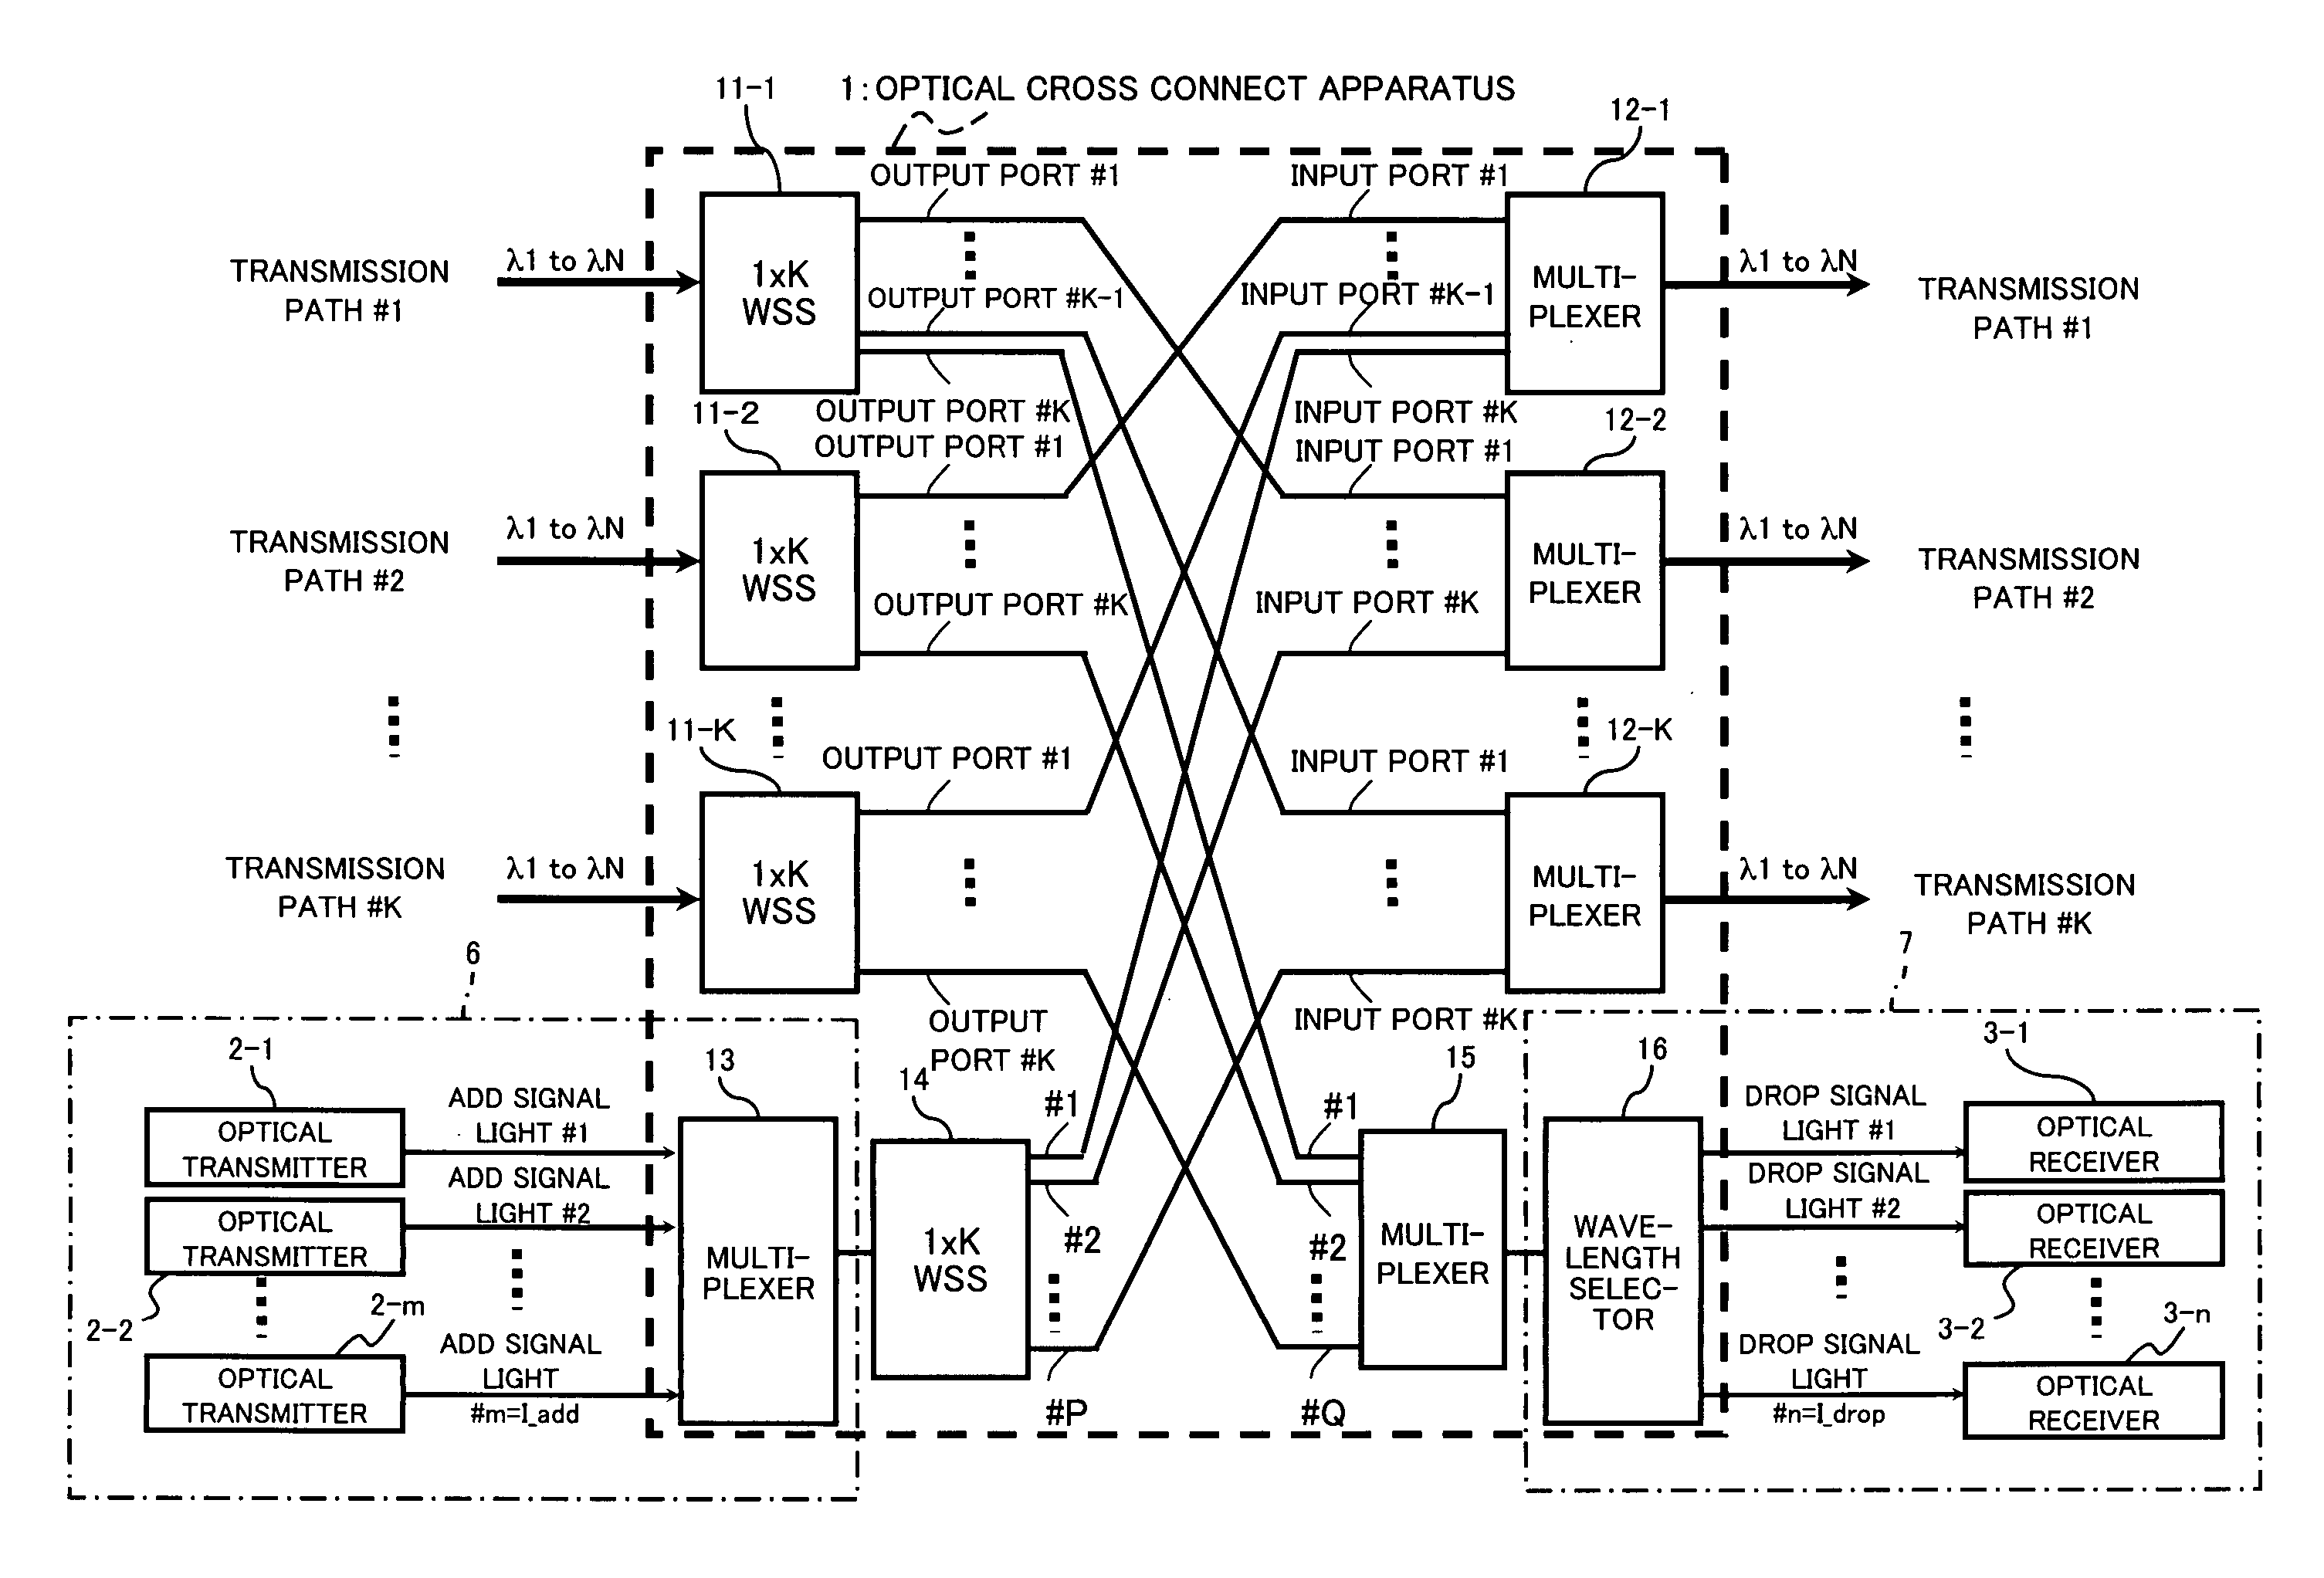 Optical transmitting apparatus, method of increasing the number of paths of the apparatus, and optical switch module for increasing the number of paths of the apparatus